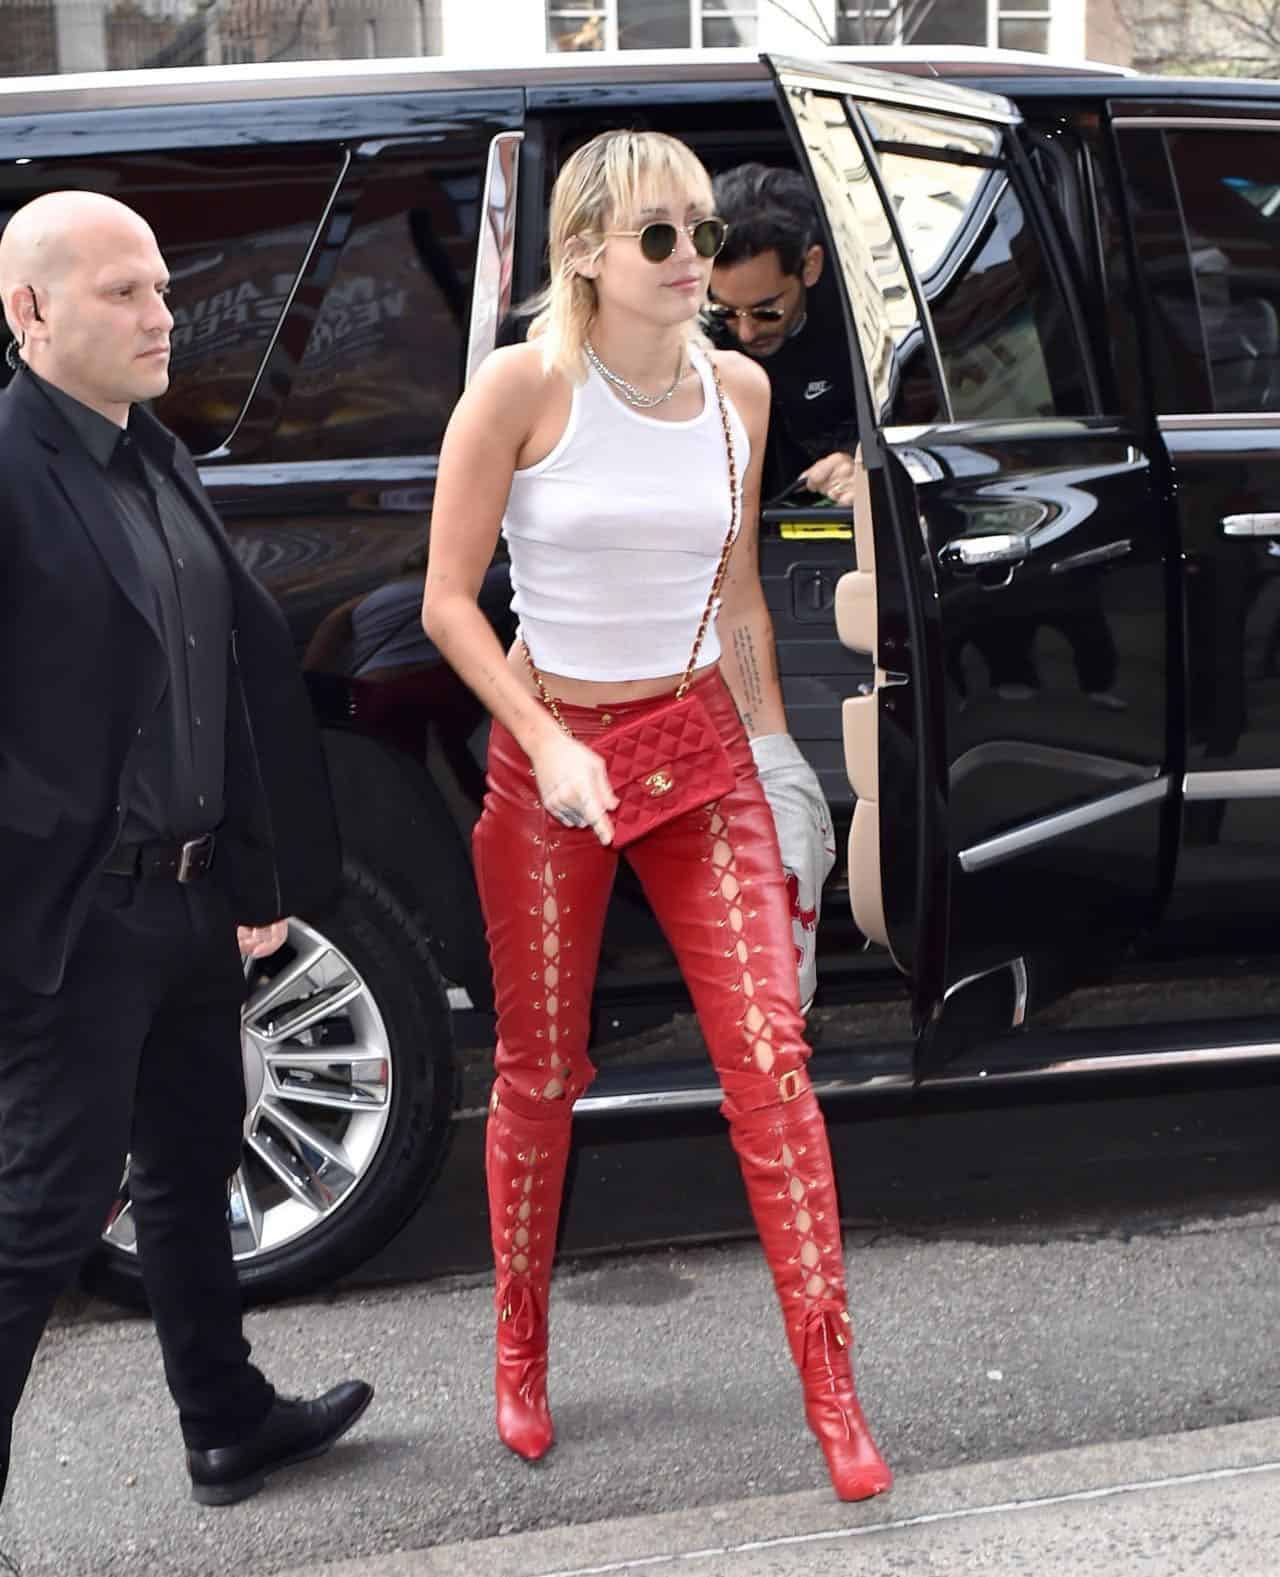 Miley Cyrus Stuns in Fiery Red Leather Lace-Up Pants and Coordinated Boots